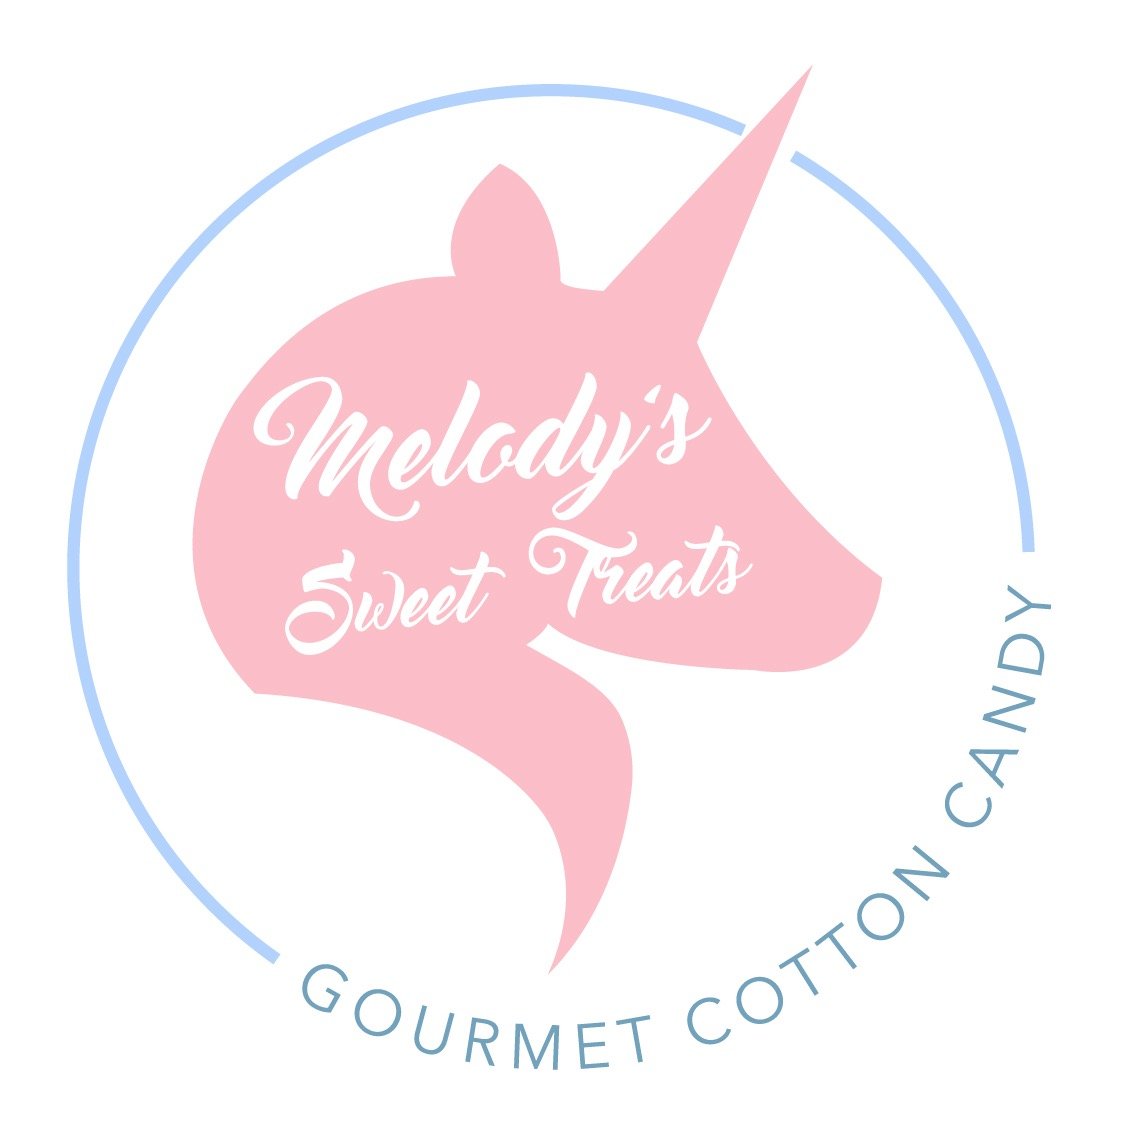 We pre-package or spin gourmet cotton candy on site! Contact us via our website, or have us ship to you at https://t.co/rzpZiJ2pxB